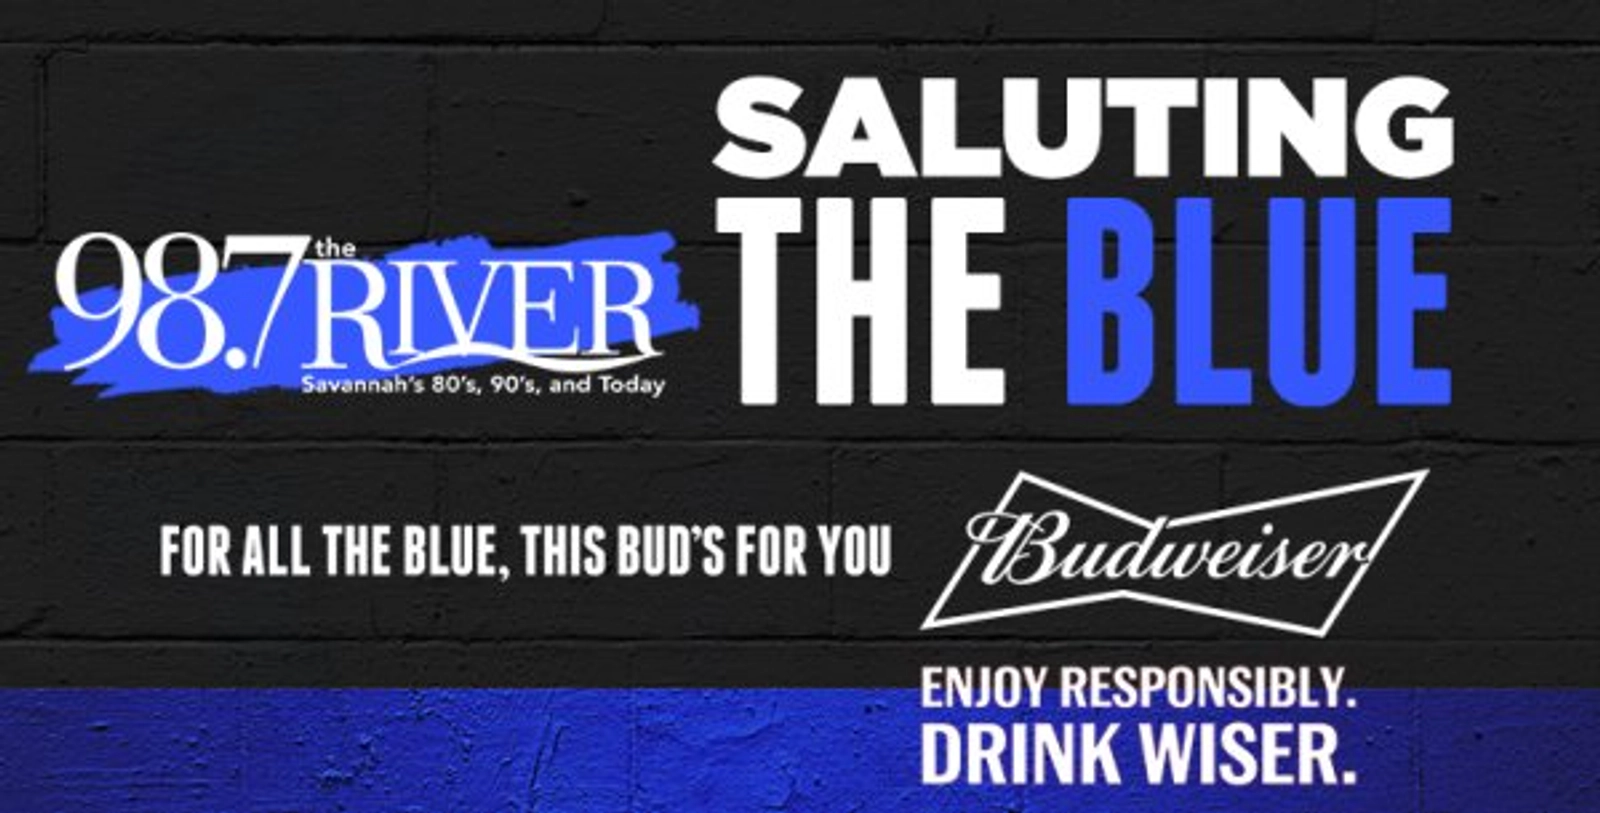  Saluting The Blue with Budweiser  - Thumbnail Image